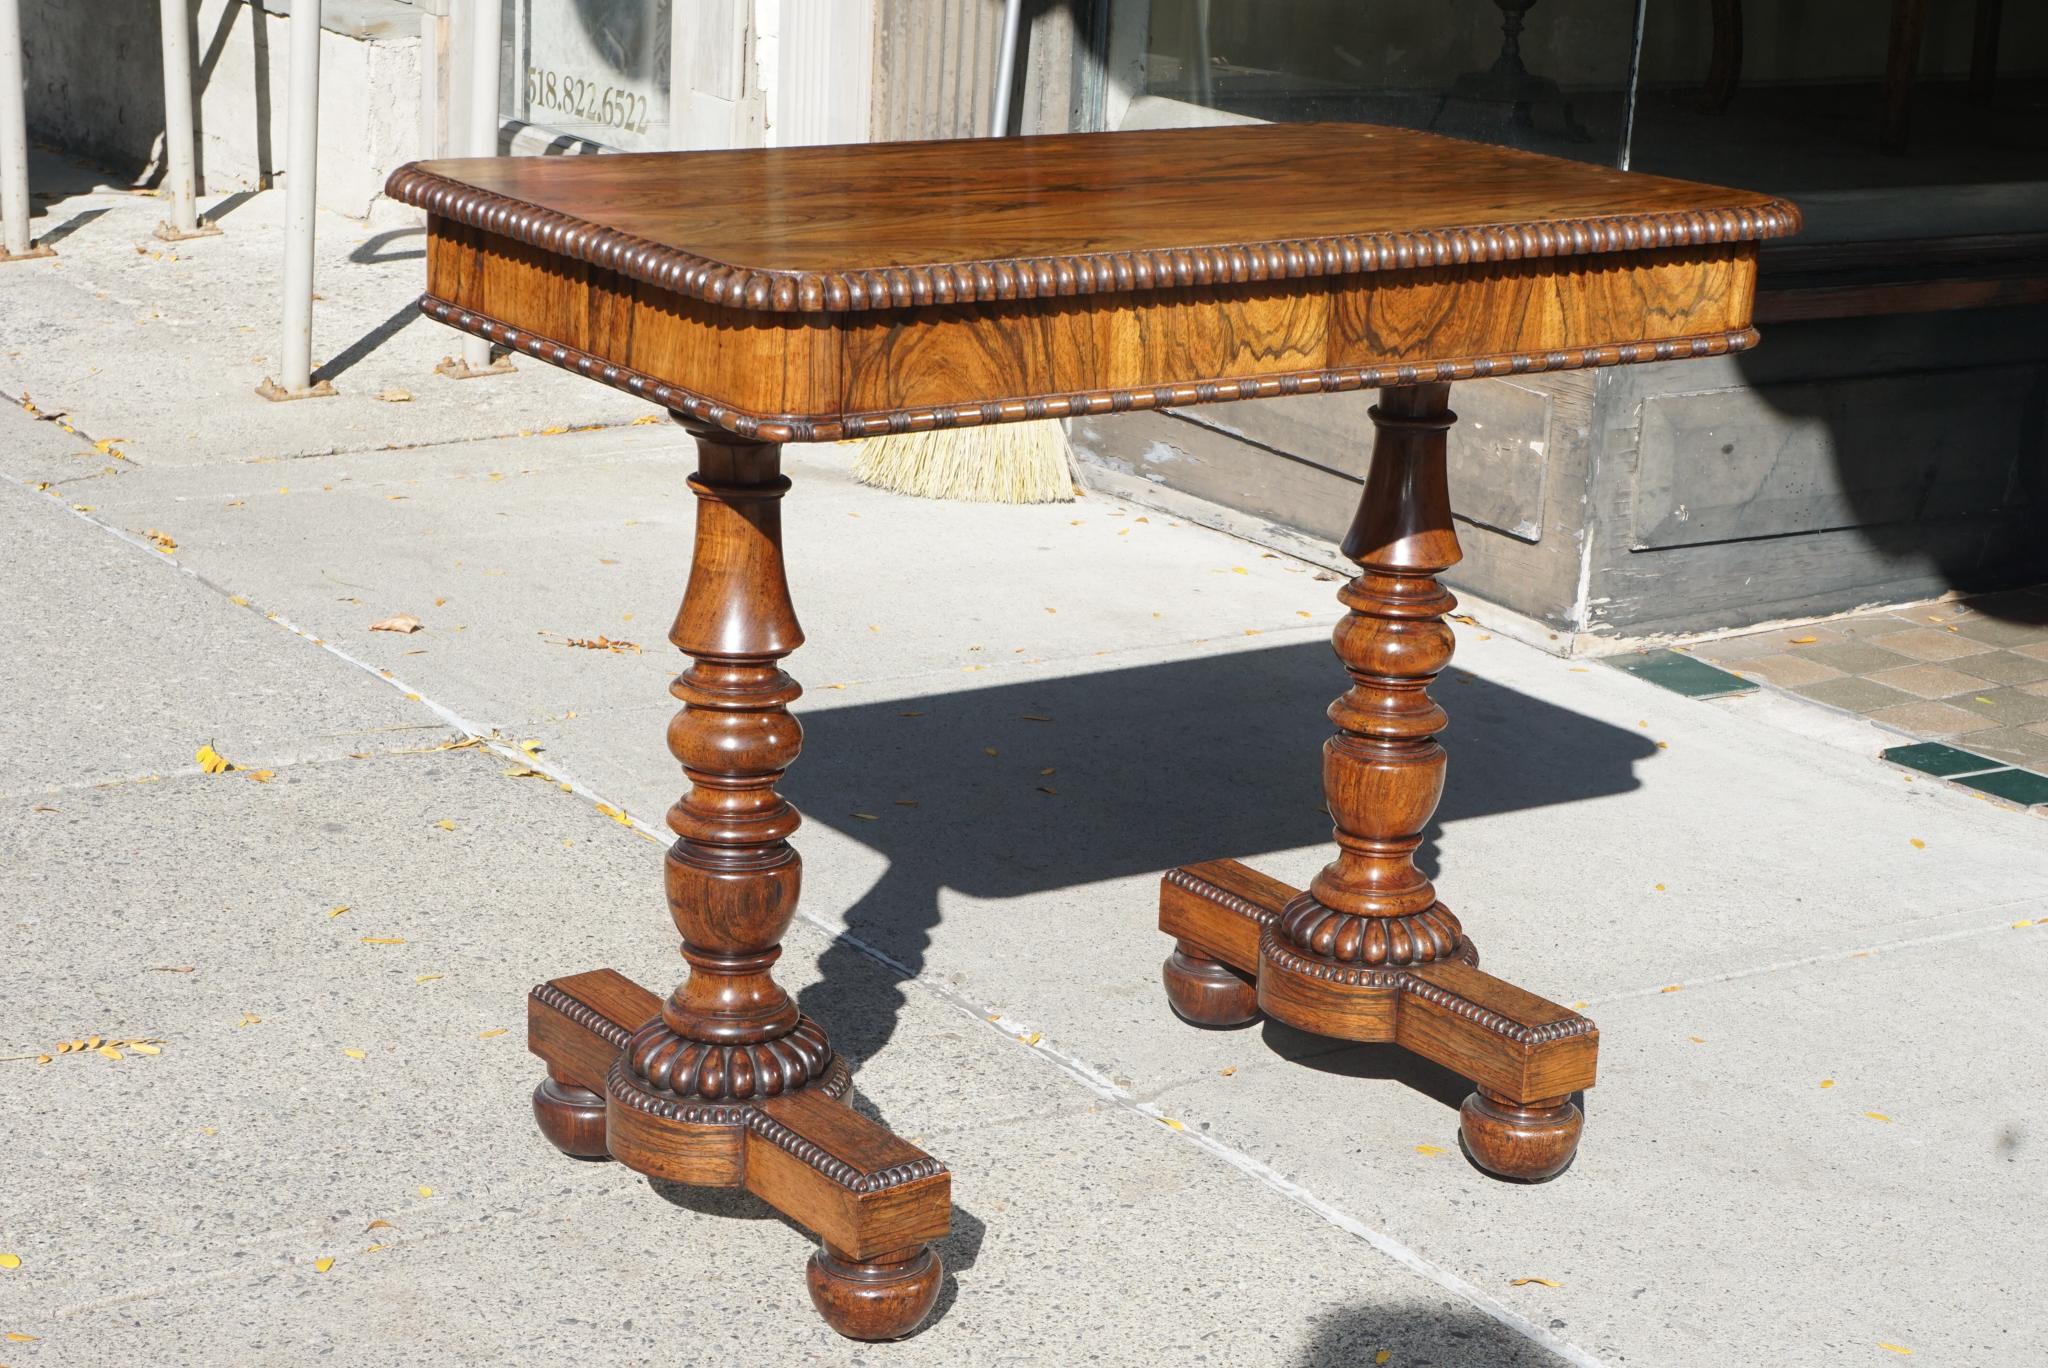 This table retains a fine old faded rosewood finish and bears striking similarities to a Gillows table of 1825 listed in Judith & Martin Millers Antiques Directory of Furniture published in 1995. The legs support entirely turned from the solid